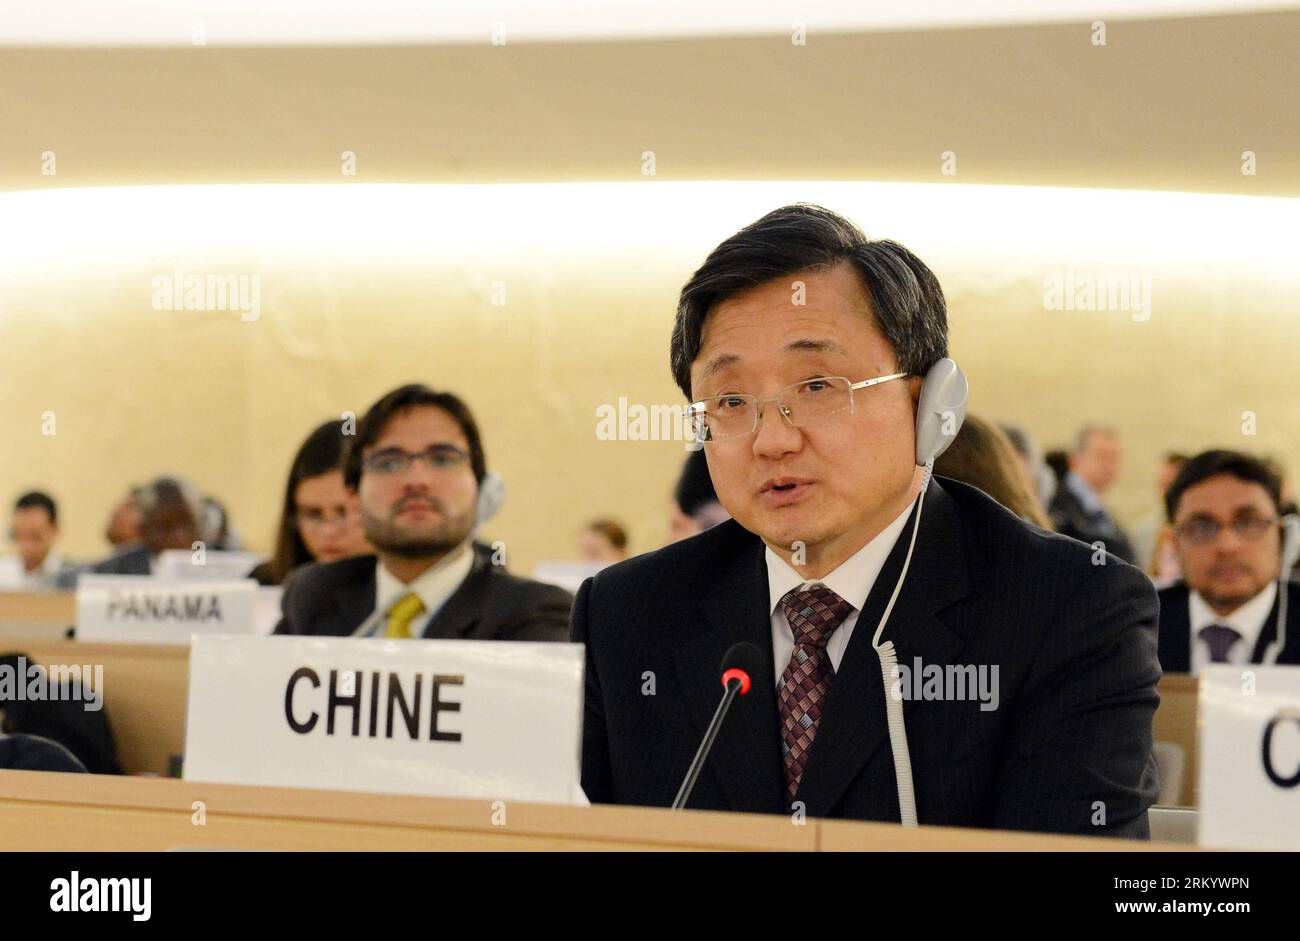 Bildnummer: 59284379  Datum: 28.02.2013  Copyright: imago/Xinhua (130228) -- GENEVA, Feb. 28, 2013 (Xinhua) -- Liu Zhenmin, permanent representative of China to the United Nations Office at Geneva and Other International Organizations in Switzerland, makes the remarks in the high-level panel on the Vienna Declaration and Program of Action (VDPA) at the Human Rights Council s 22nd session in Geneva, Feb. 28, 2013. China called upon all parties to promote dialogue and cooperation in human rights on Monday as high-level officials commemorated the 20th anniversary of the adoption of the VDPA. (Xin Stock Photo